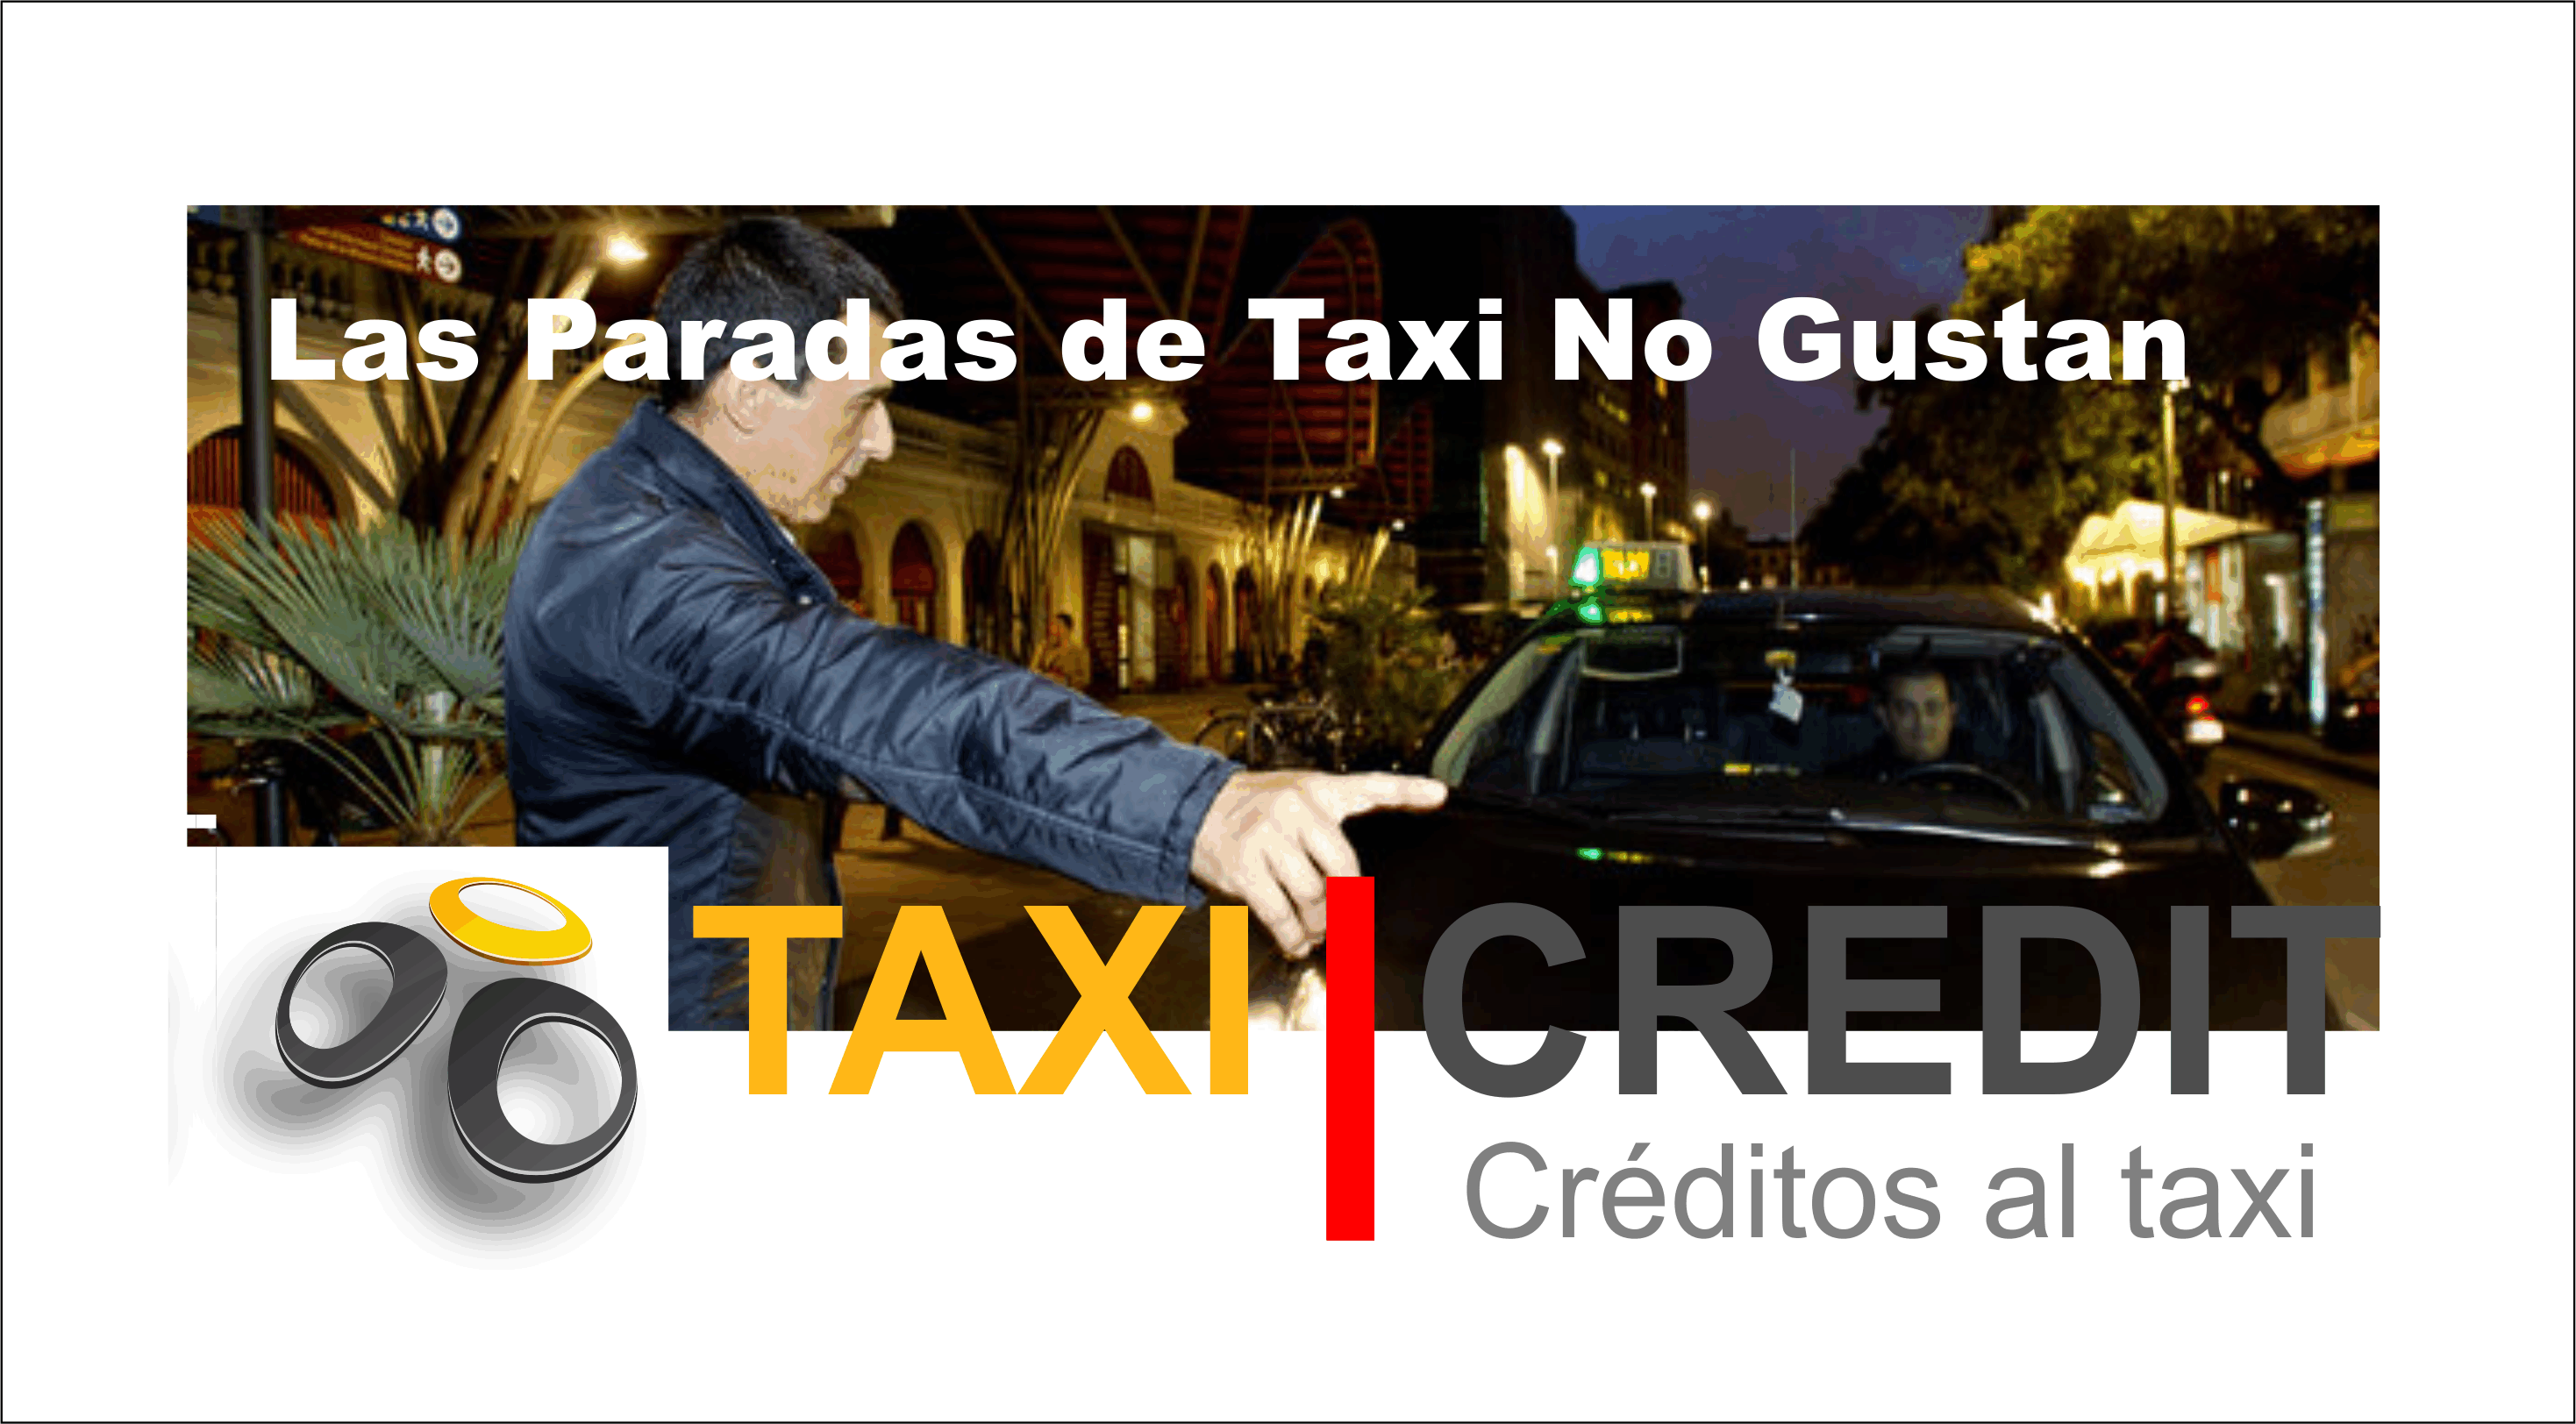 Taxicredit001